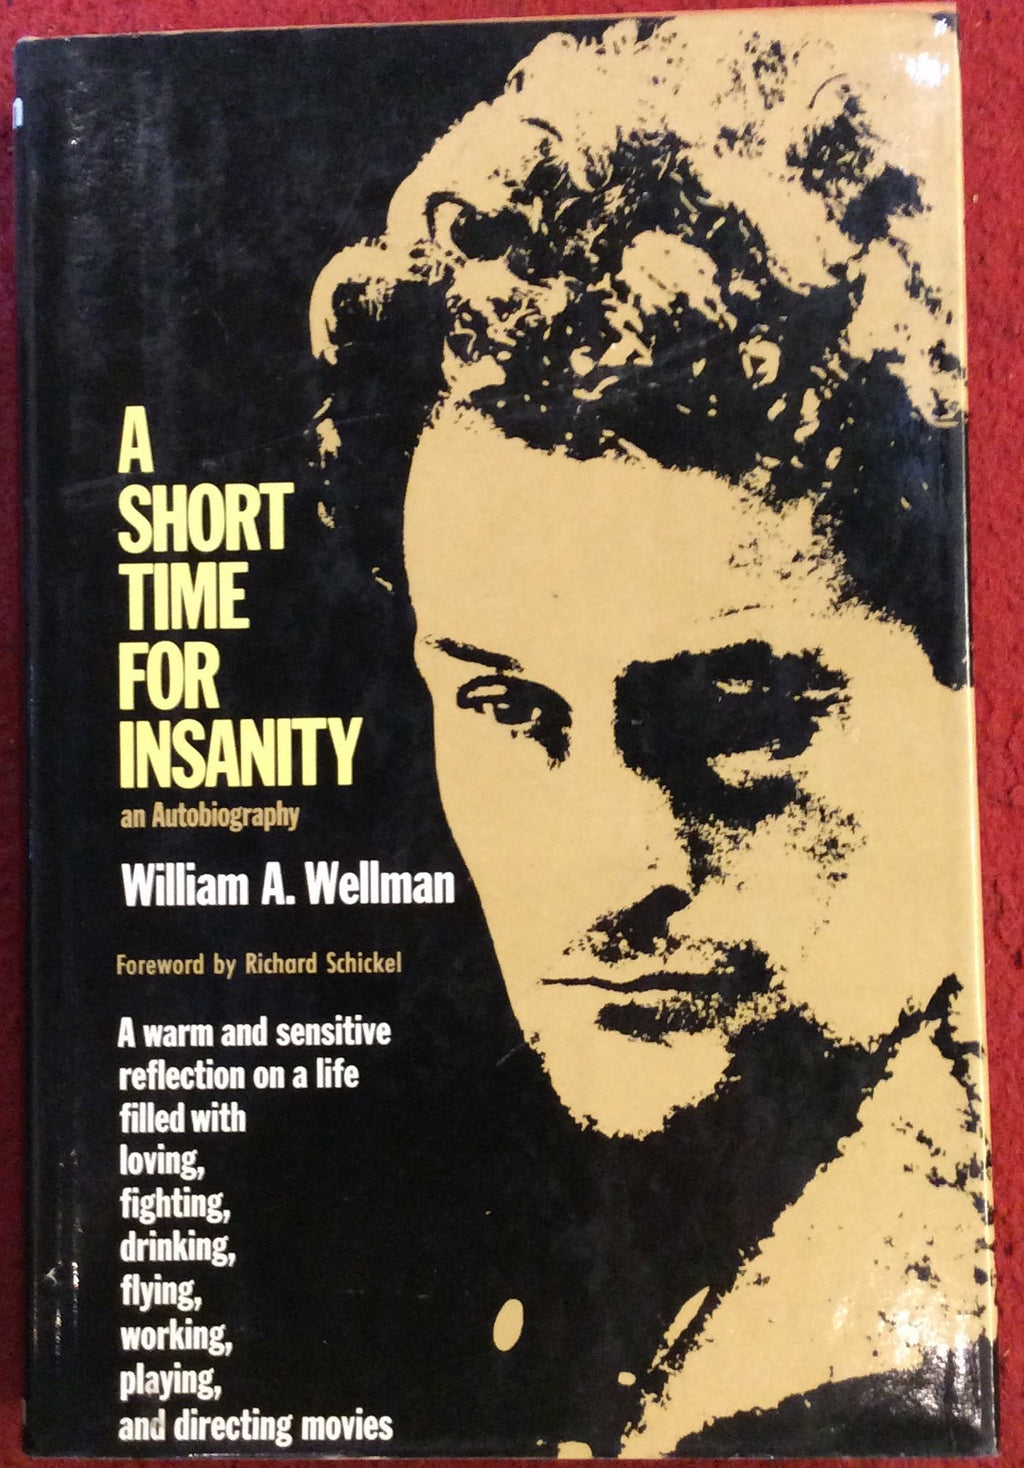 A Short Time For Insanity, William A. Wellman, Hawthorn, 1974 *